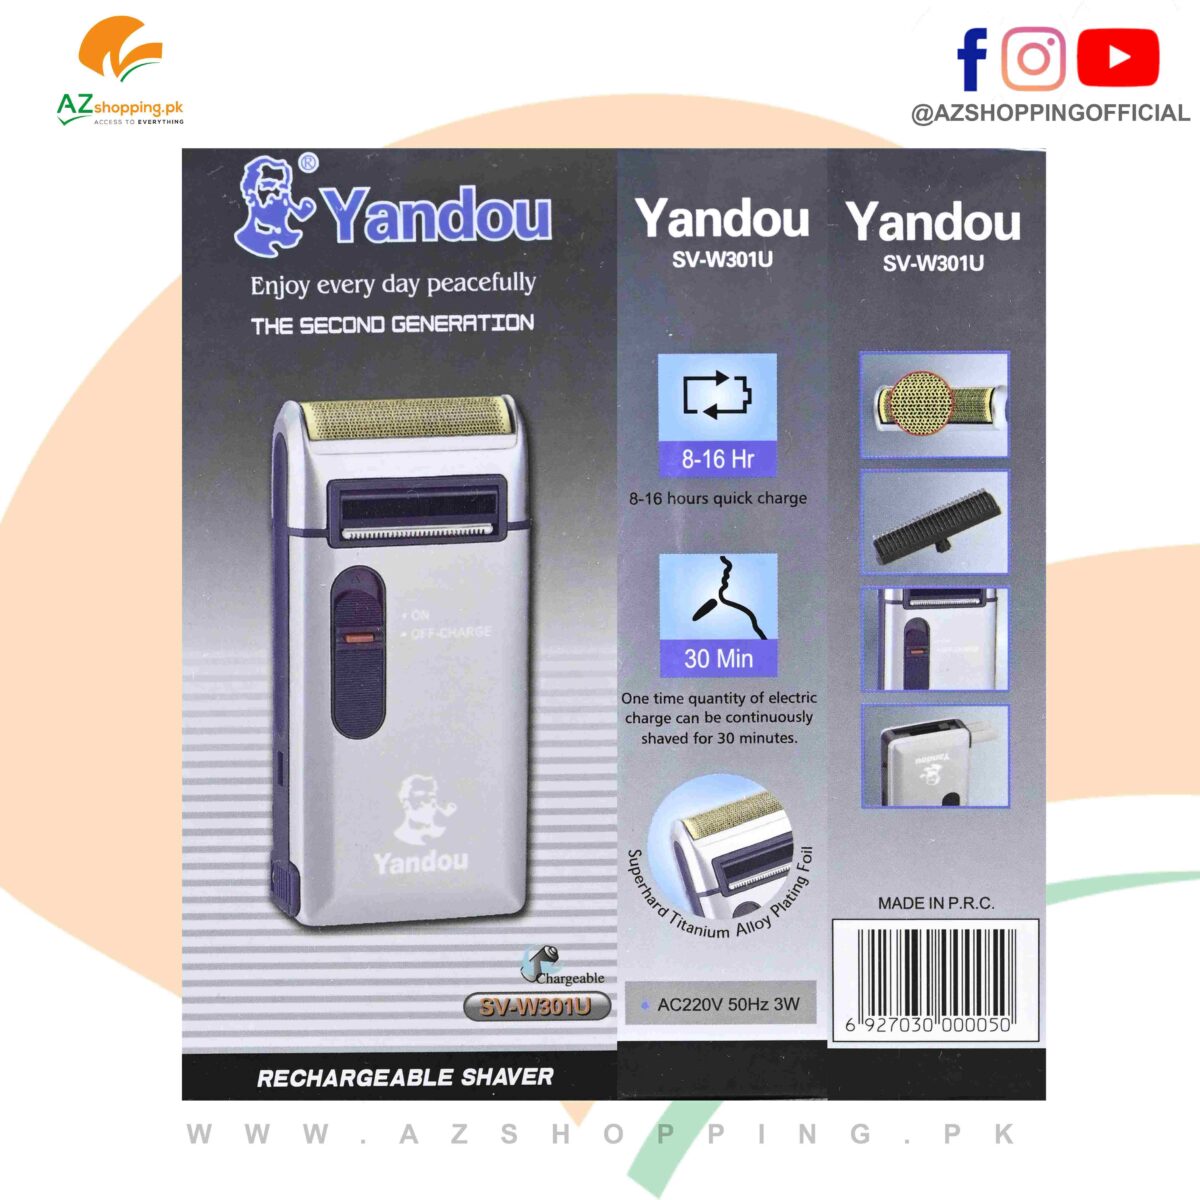 Yandou – Second Generation Portable Rechargeable Shaver with Super hard Titanium Alloy Plating Foil - Continuously 30 Min Shaved, AC220V 50Hz 3W - Model: SV-W301U